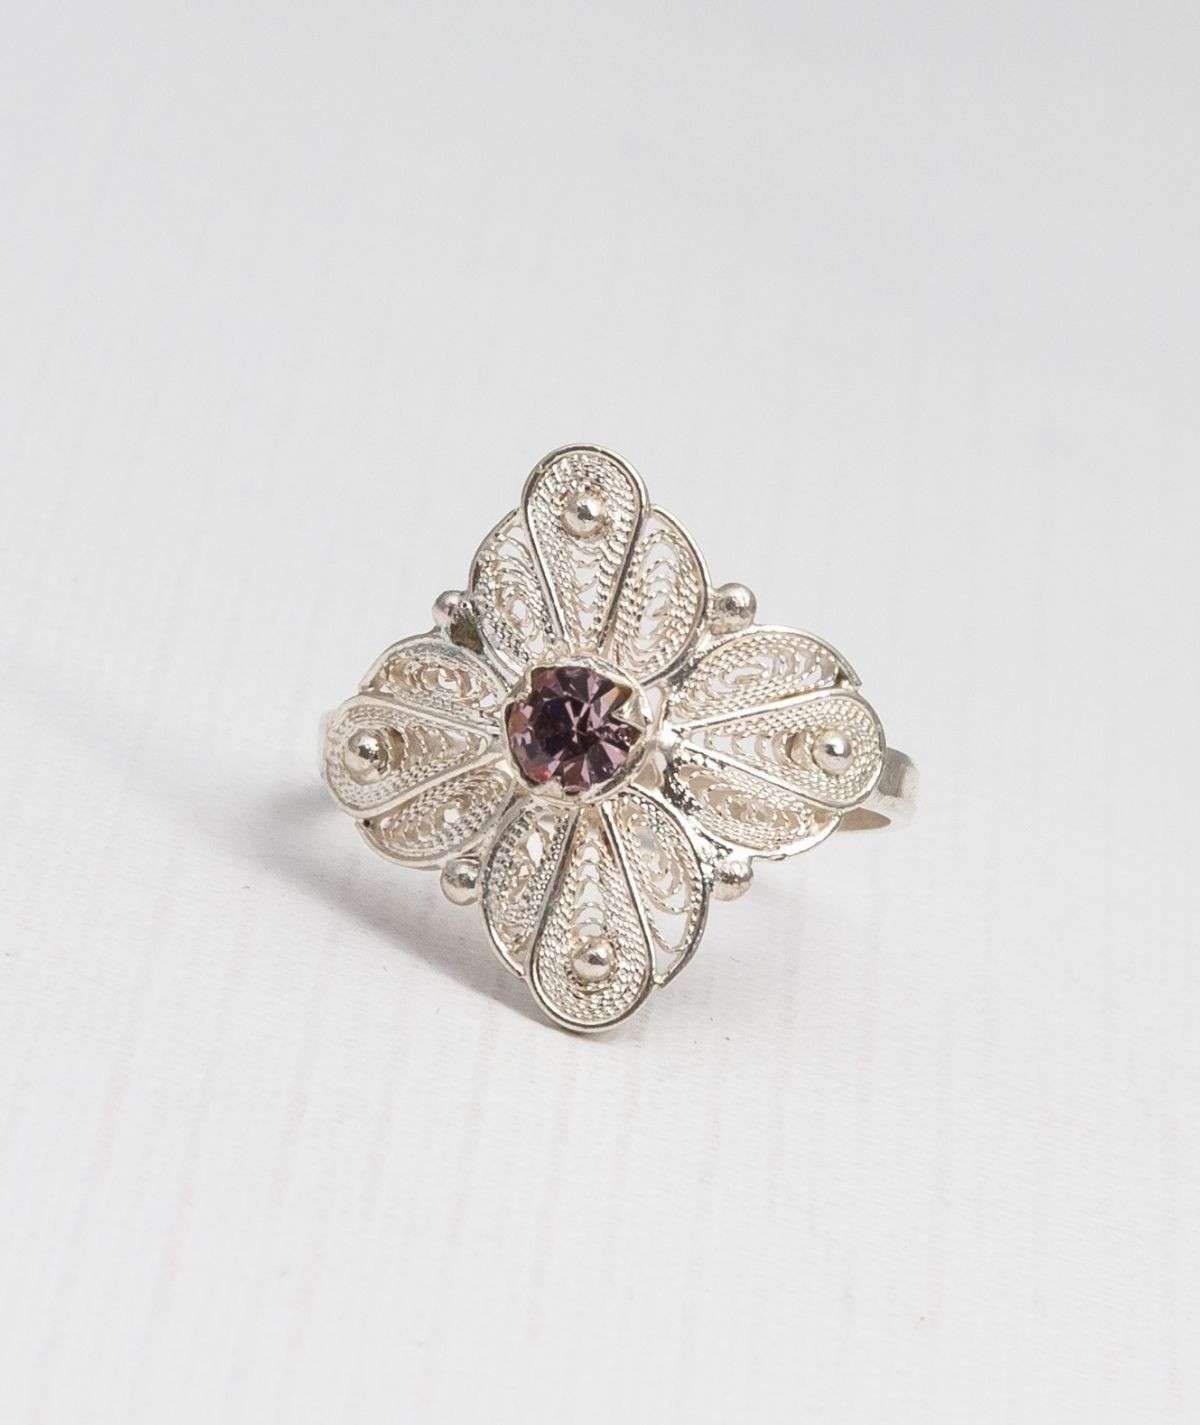 Filigree and Zircon Ring made by ARTEMANOS